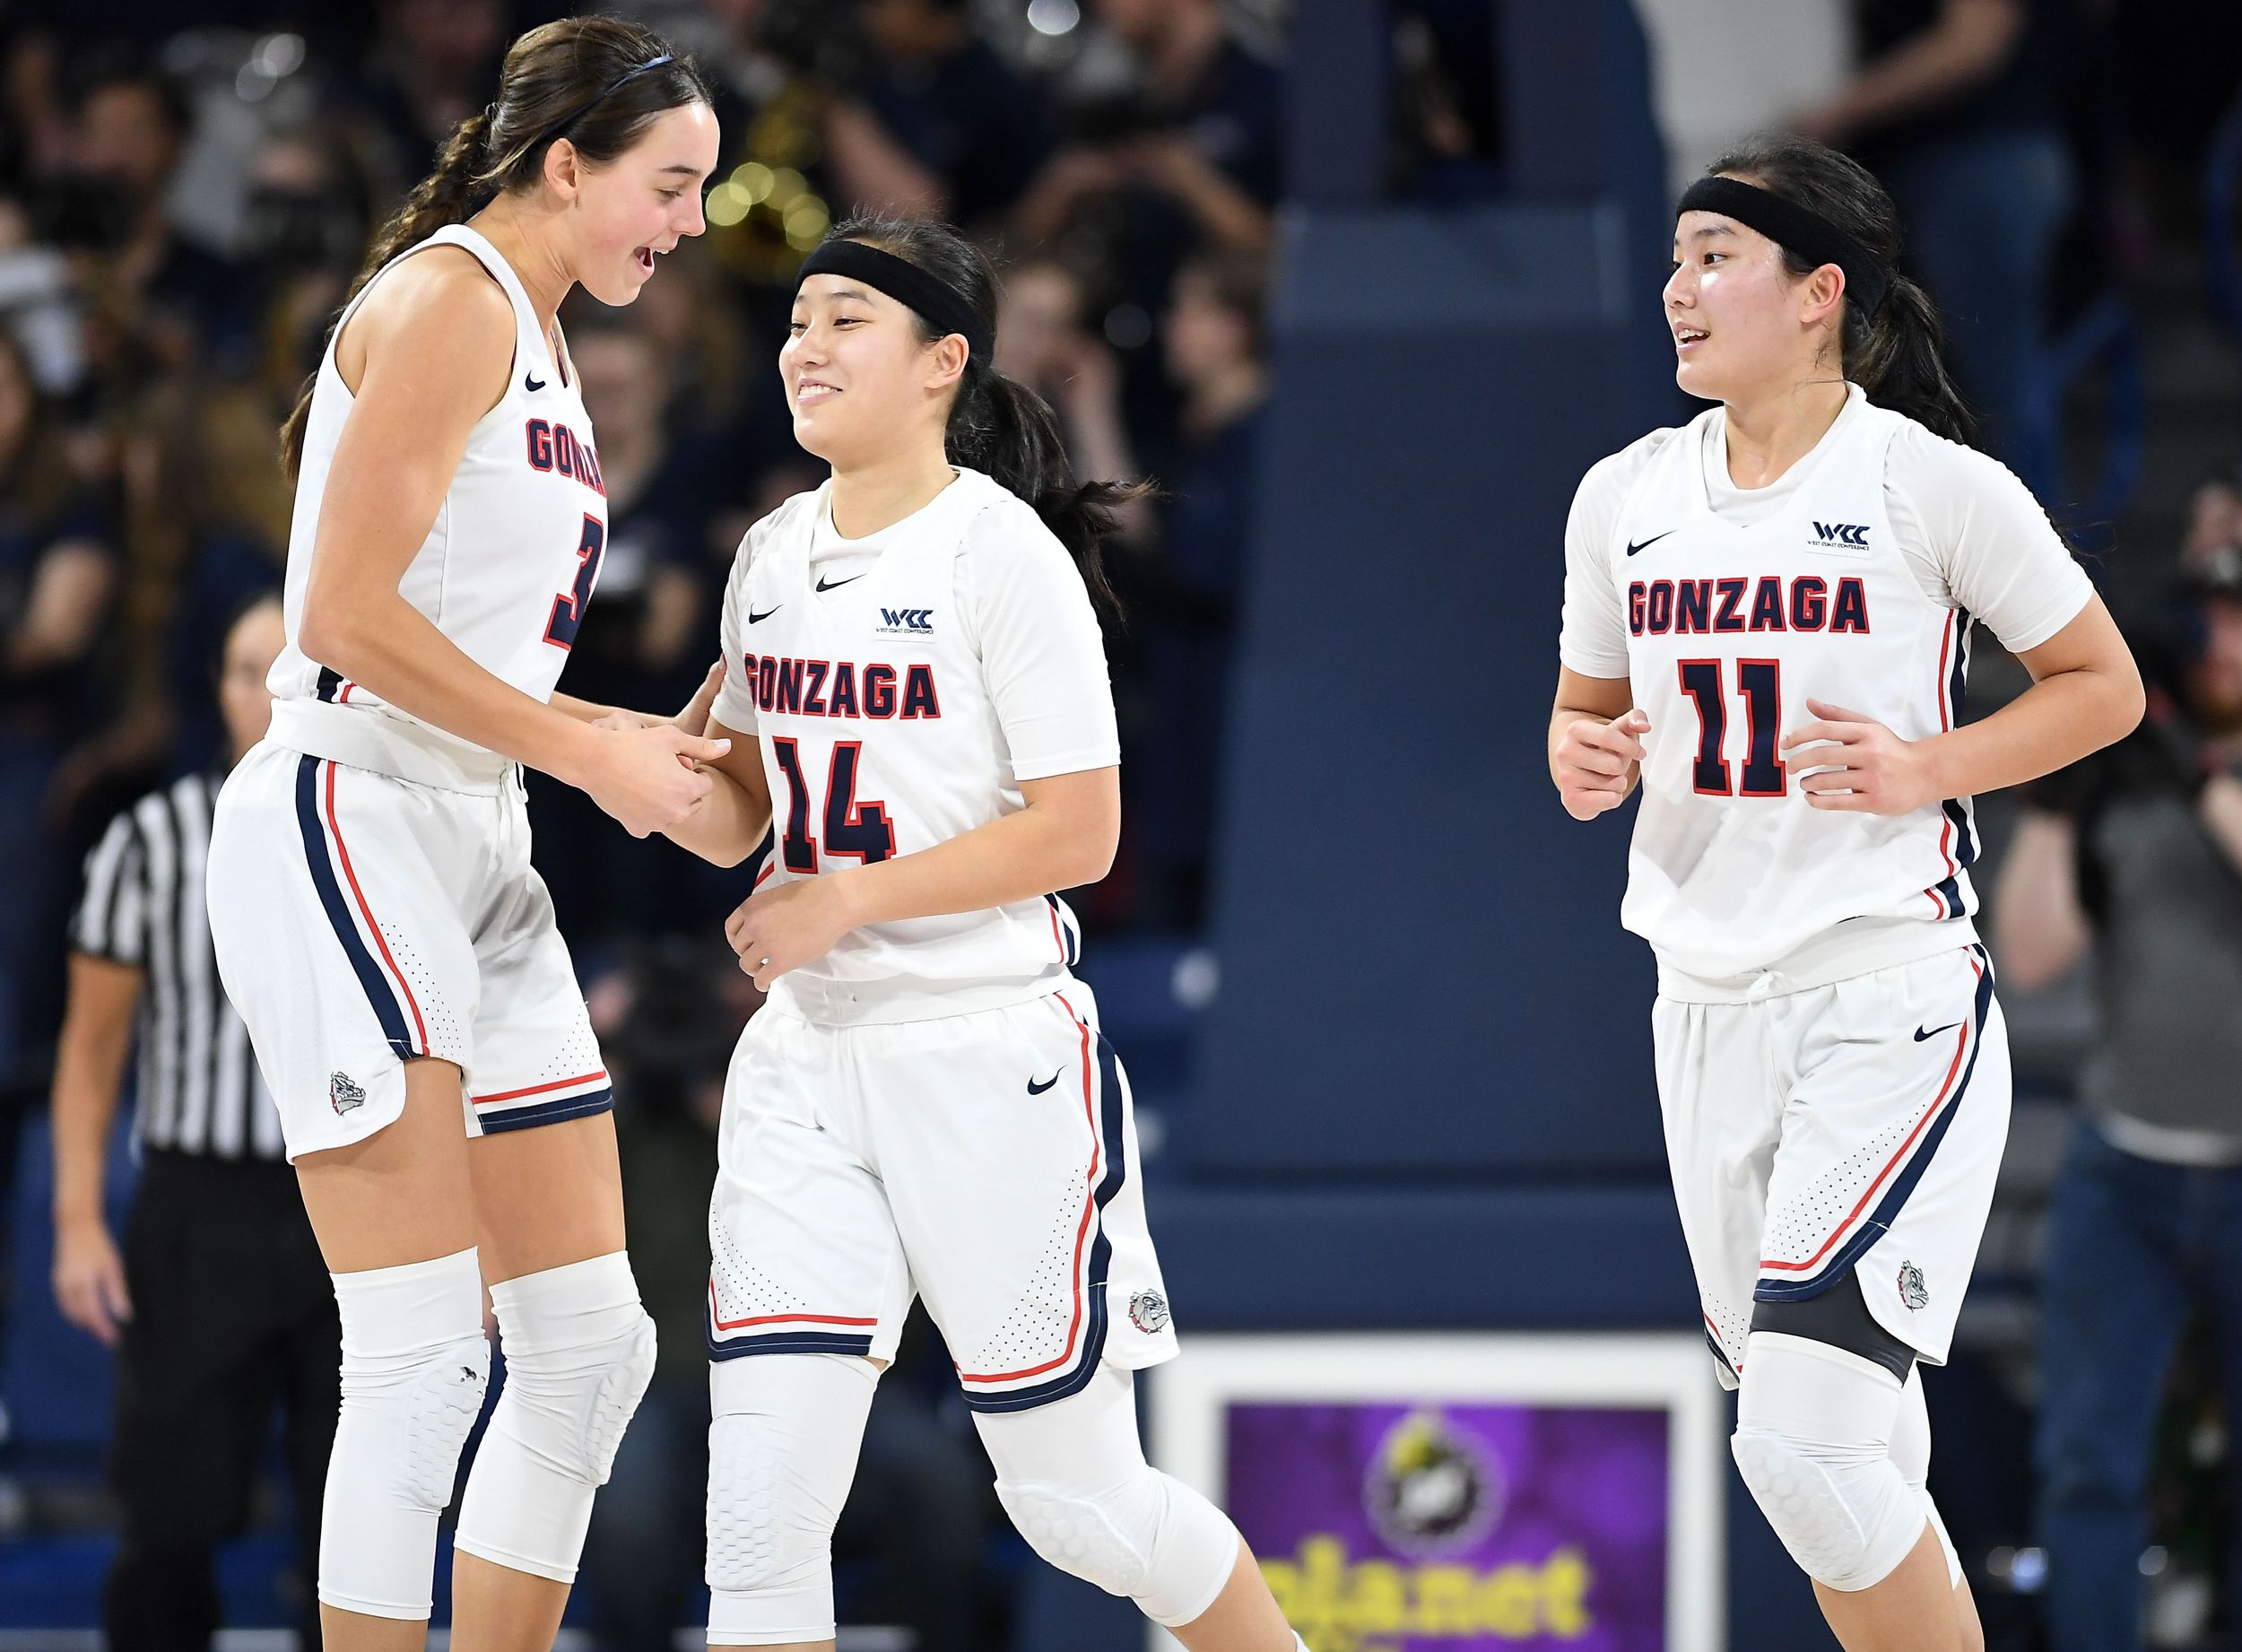 Gonzaga's Truong sisters fight against stereotypes, look to empower younger  generations of Asian American athletes